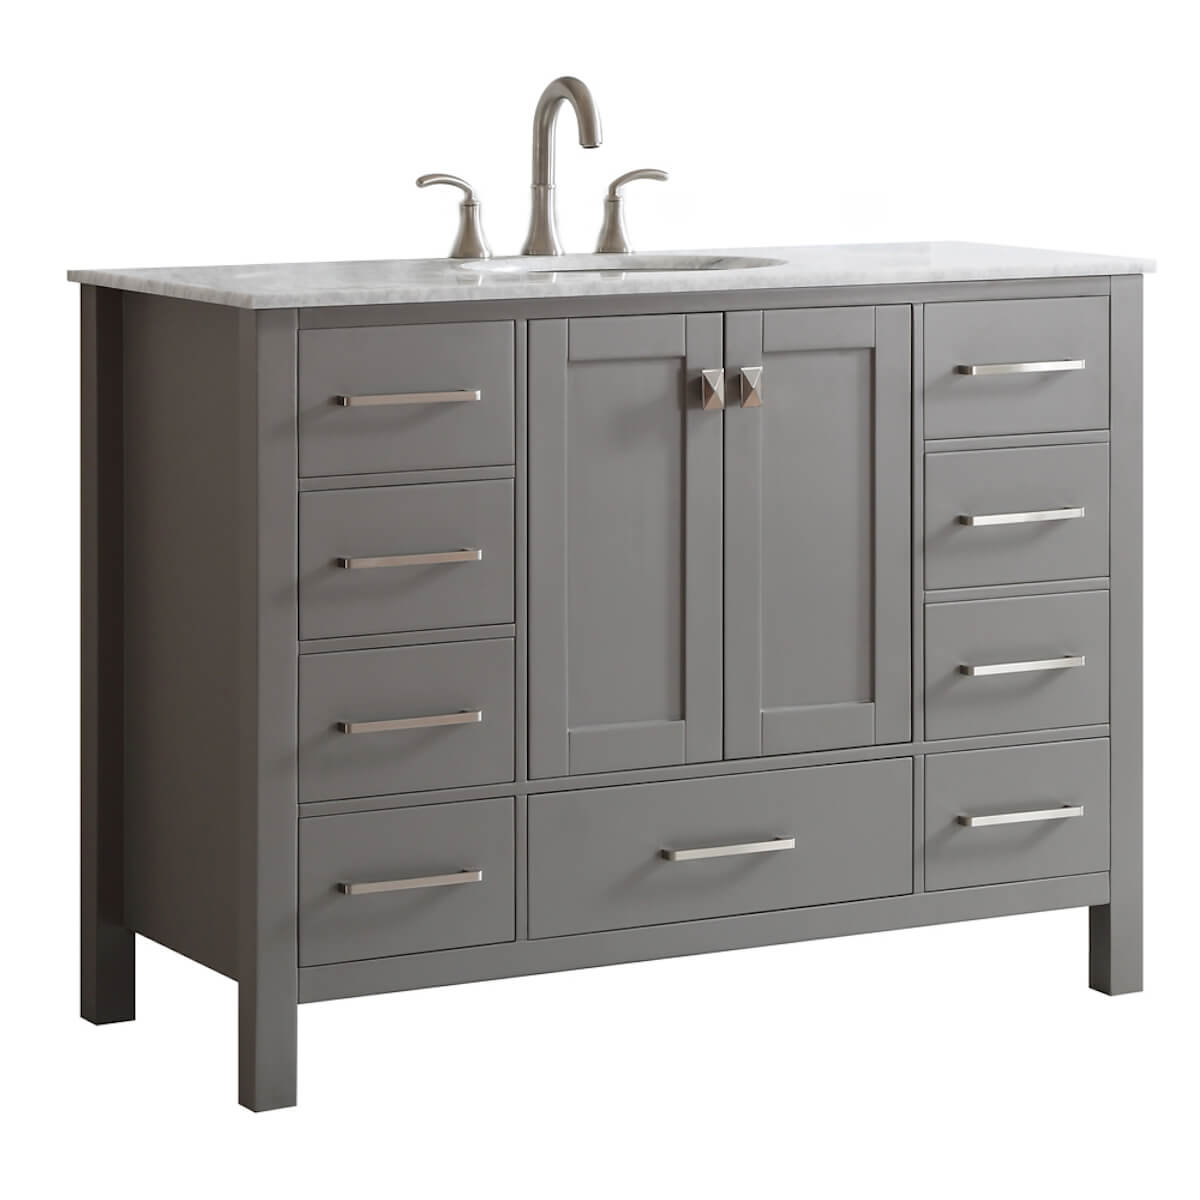 Vinnova Gela 48" Grey Freestanding Single Vanity with Carrara White Marble Countertop Without Mirror Side 723048-GR-CA-NM